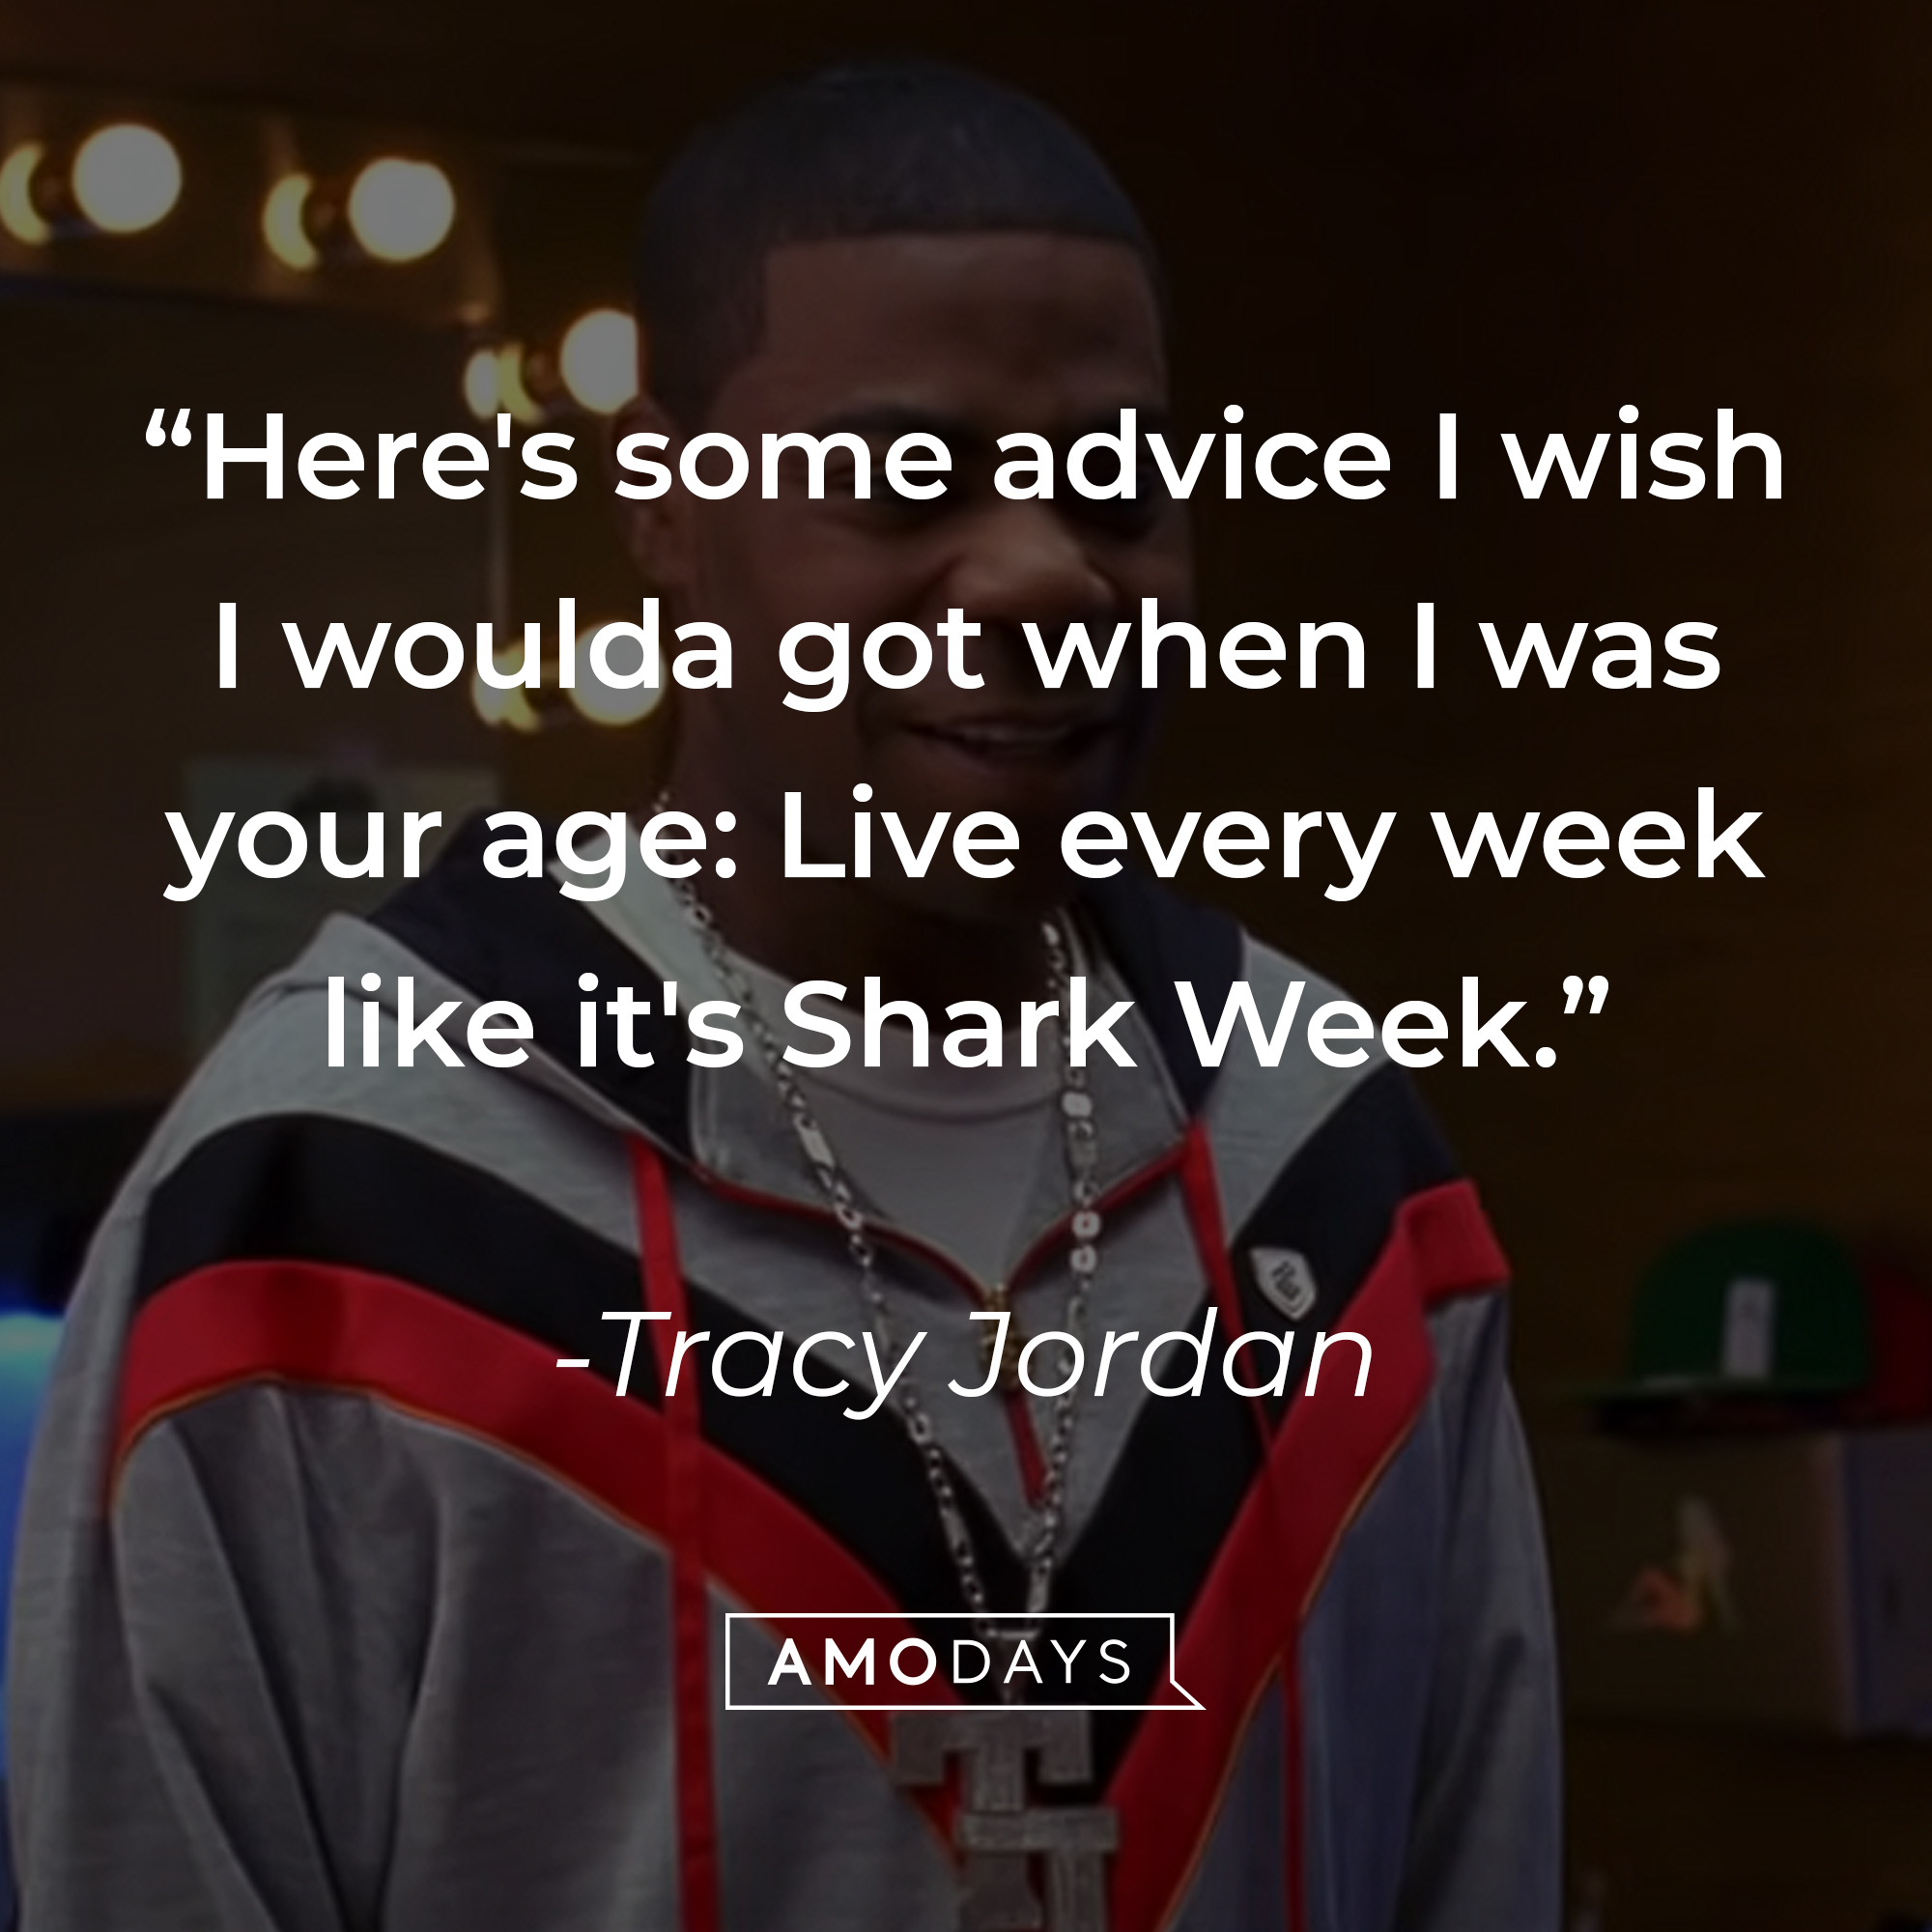 Tracy Jordan's quote, "Here's some advice I wish I woulda got when I was your age: Live every week like it's Shark Week." | Source: facebook.com/30RockTV